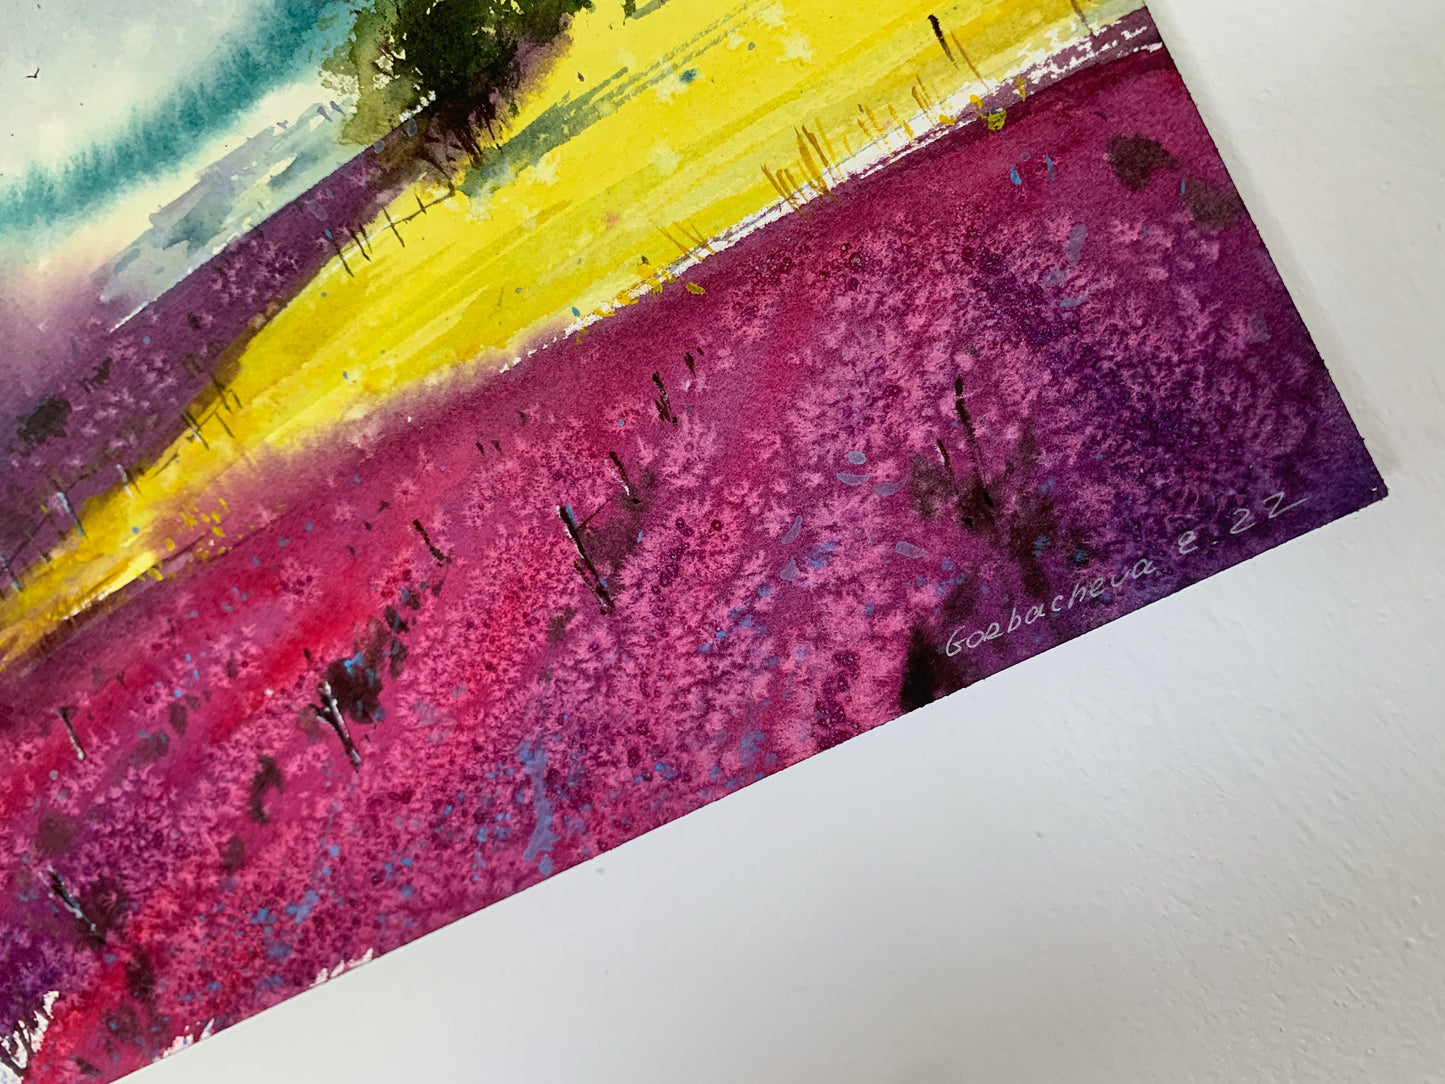 Lavender Field Painting, Original Watercolor Artwork, Landscape Wall Art, Gift For Her, Purple, Yellow, Blue